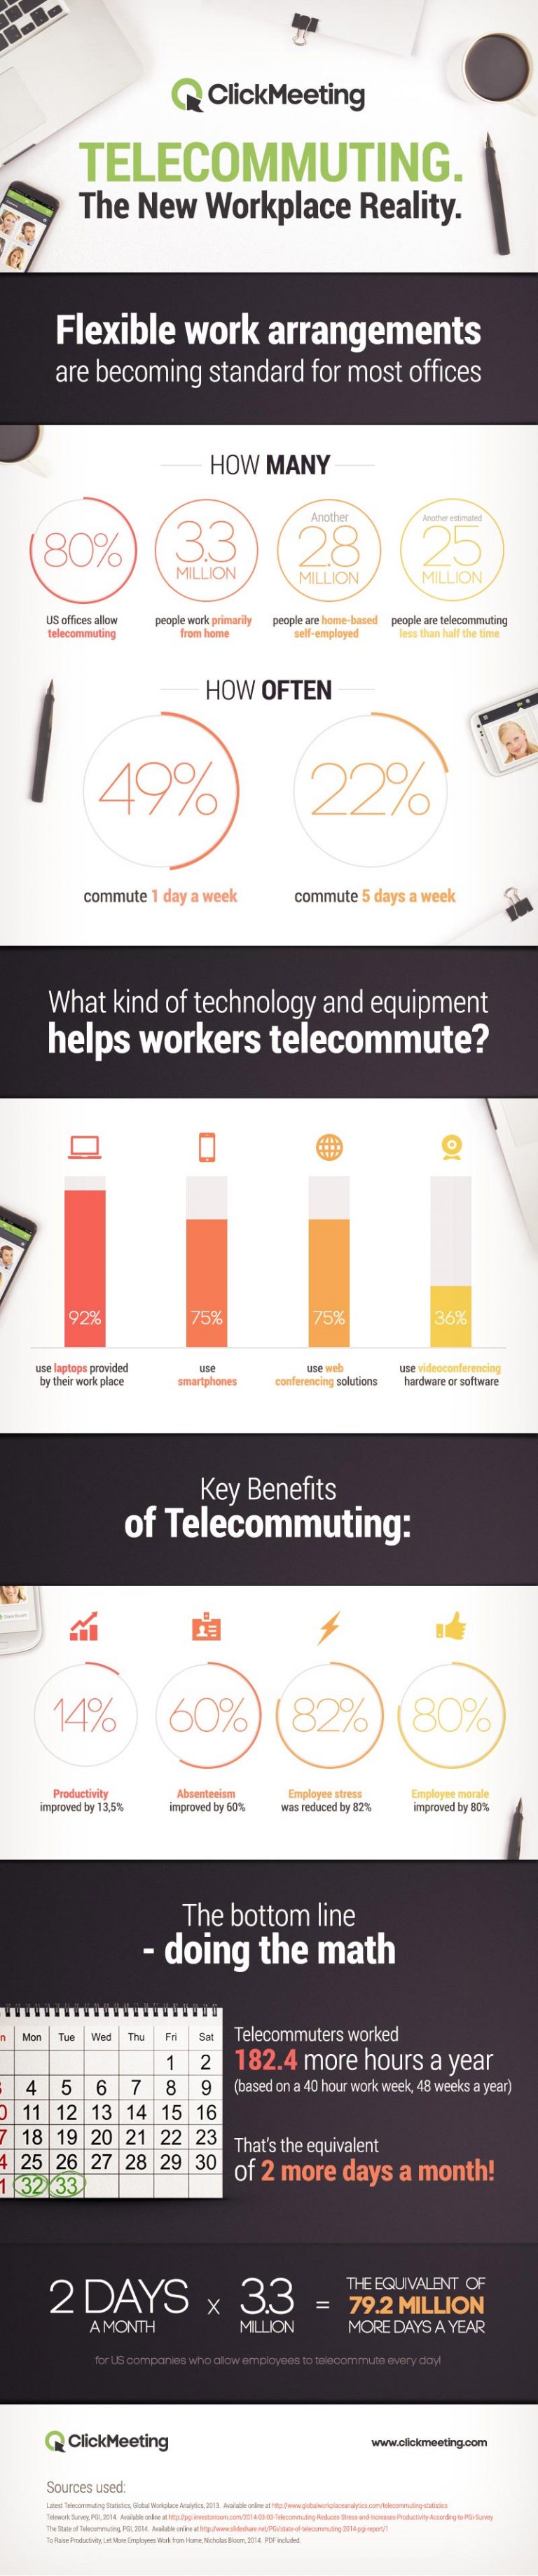 Flexible work arrangements are becoming standard for most offices. 3.3 million people work primarily from home. Another 2.8 million people are home-based self-employed. Another estimated 25 million people are telecommuting less than half the time. That's over 30 million telecommuters! 80% US offices allow telecommuting, 71% of workers participate in a telecommuting program, 49%, commute 1 day a week, 22% commute 5 days a week Who are these telecommuters? The average telecommuter is male, mid to late 40's, earns about $58k annually and works for a company with 100 employees What kind of technology and equipment helps workers telecommute? 92% use laptops provided by their work place, 75% use smartphones, 75% use web conferencing solutions, 36% use videoconferencing hardware or software. Telecommuters were 13.5% more productive than staff in the office. They also put in 9.5% more time.If increased productivity and time spent working isn't convincing enough for employers to institute a telecommuting program, there are other benefits too. Absenteeism improved by 60%, Employee stress was reduced by 82%, Employee morale improved by 80%. Why does telecommuting work so well? 1/3rds of the productivity increase was due to a quieter environment. 2/3rds of the productivity increase was due to people working more hours – they started earlier, took shorter breaks and worked until the end of the day. The bottom line - doing the math. Telecommuters worked: 3.8 more hours a week, 15.2 more hours a month, 182.4 more hours a year (based on a 40 hour work week, 48 weeks a year). That means telecommuting employees worked the equivalent of 2 more days a month! Two days a month X 3.3 million = the equivalent of 79.2 million more days a year for US companies who allow employees to telecommute every day!